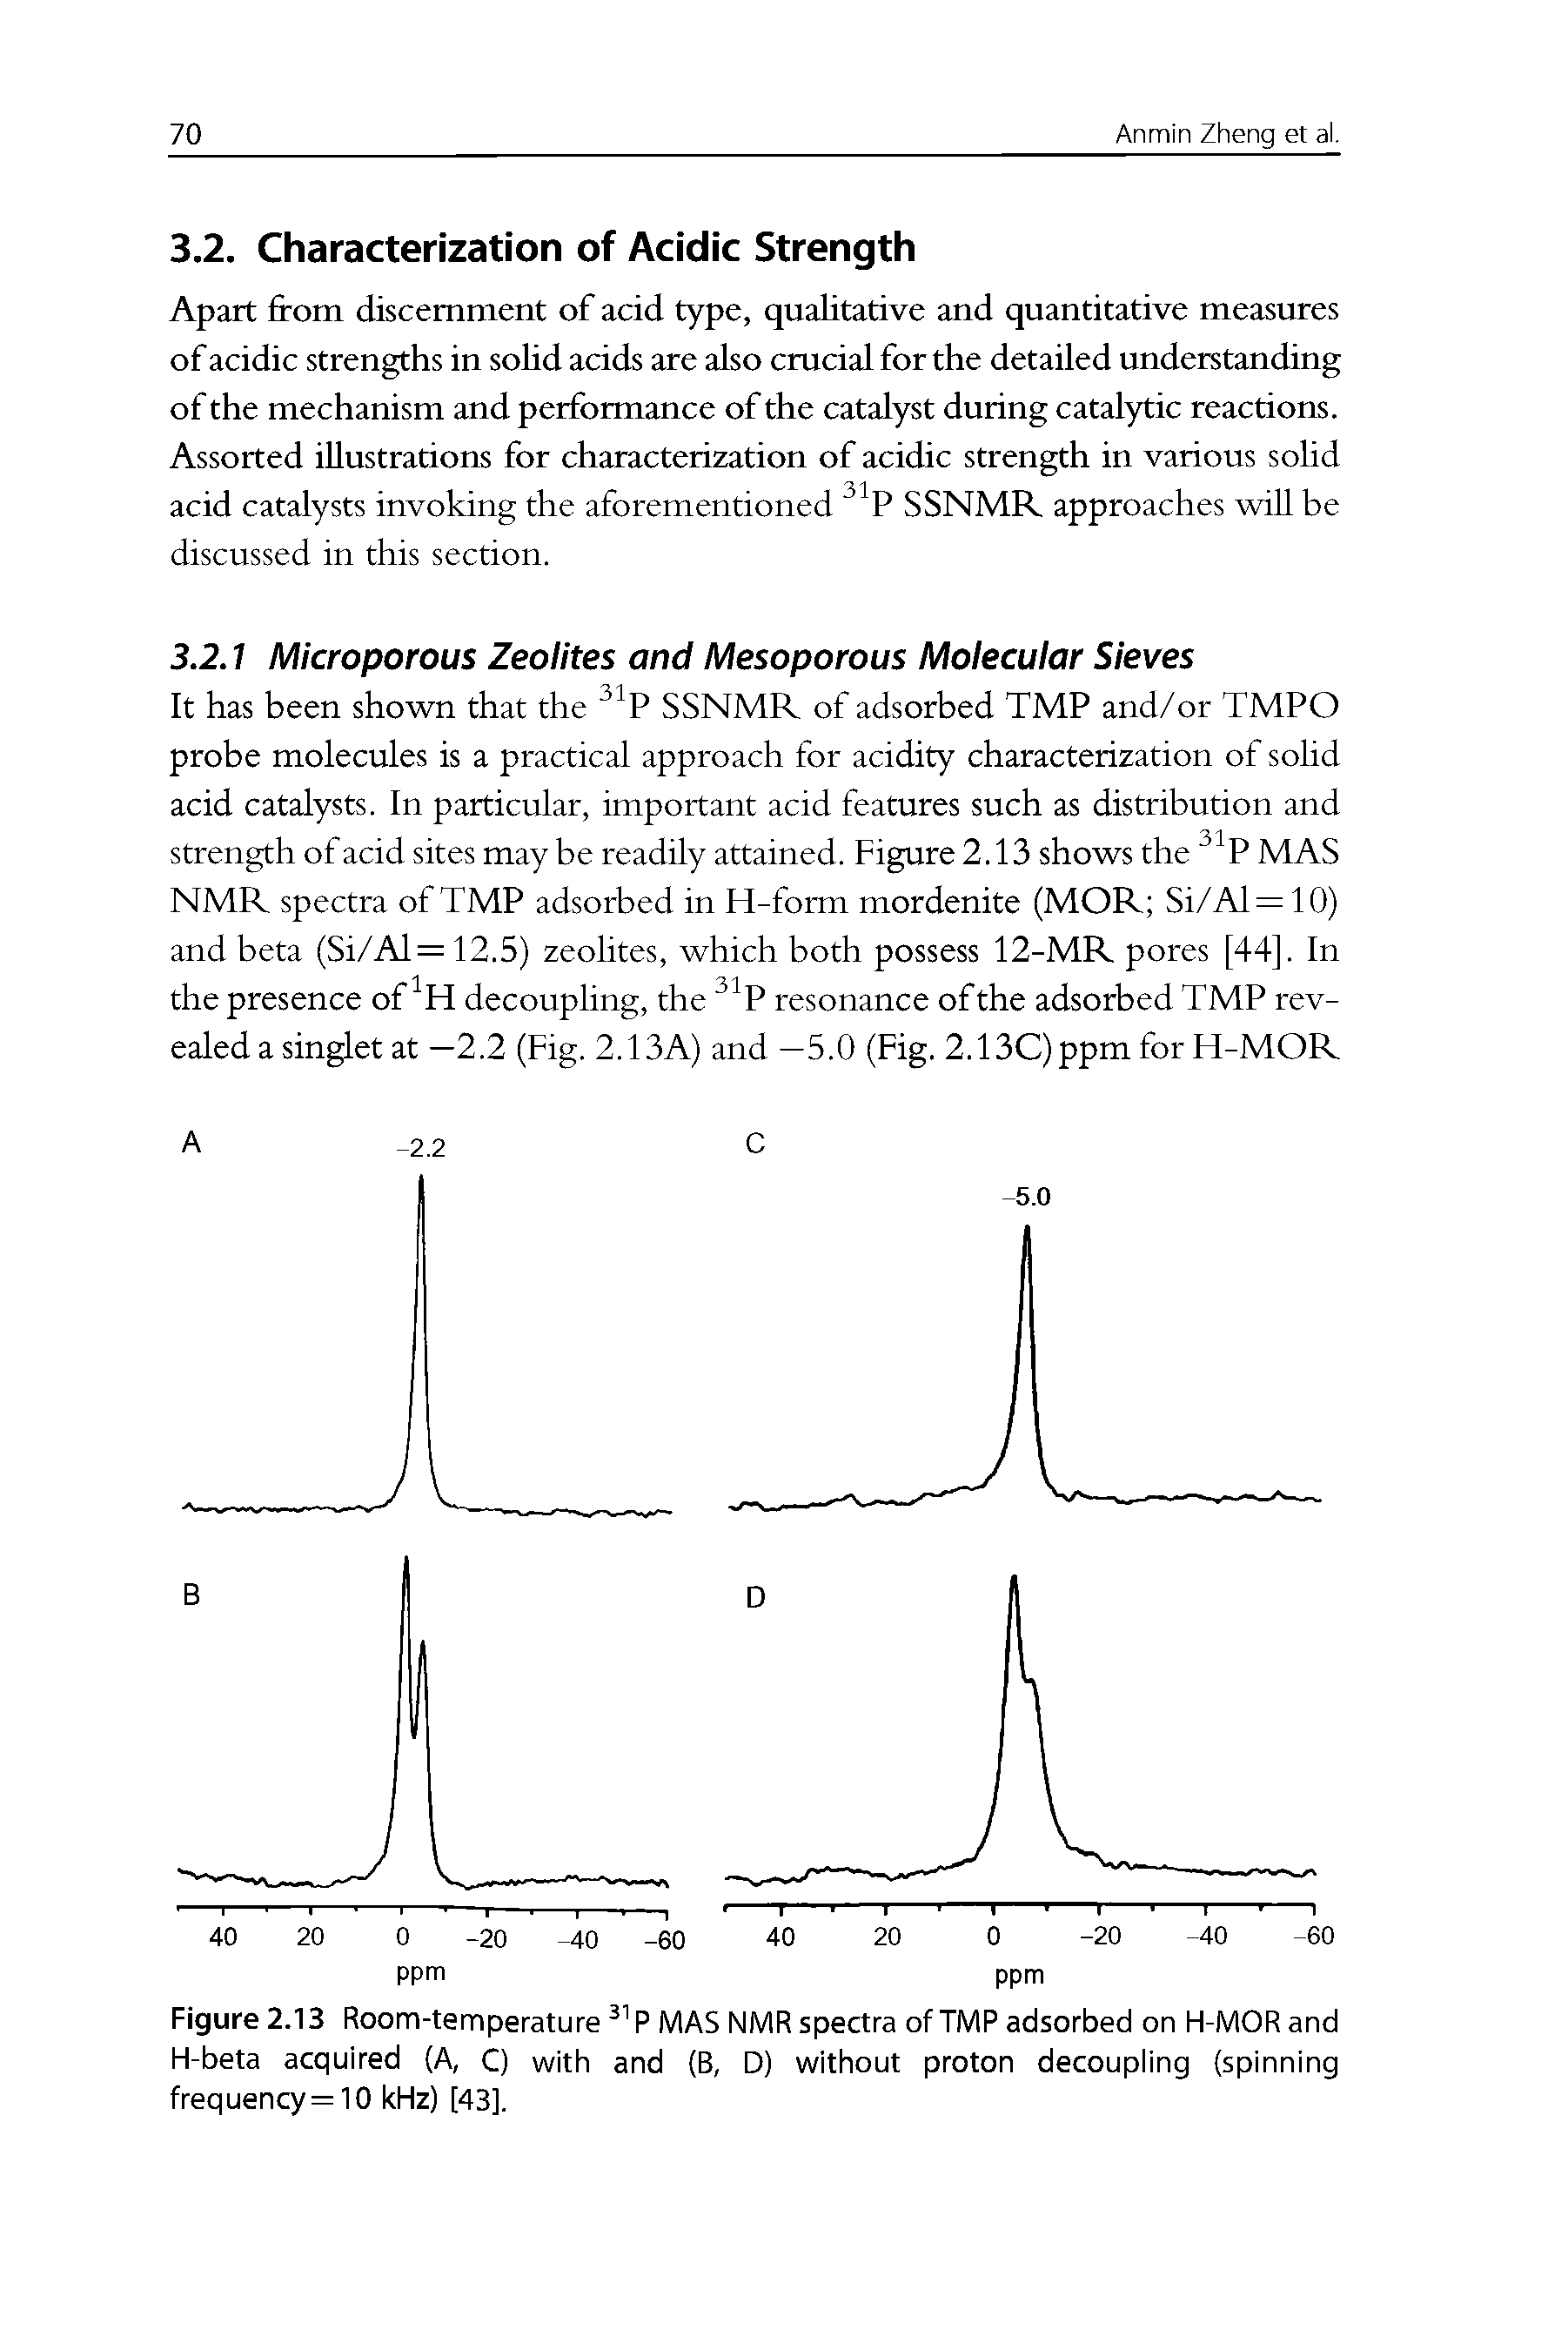 Figure 2.13 Room-temperature MAS NMR spectra of TMP adsorbed on H-MORand H-beta acquired (A, C) with and (B, D) without proton decoupiing (spinning frequency =10 kHz) [43].